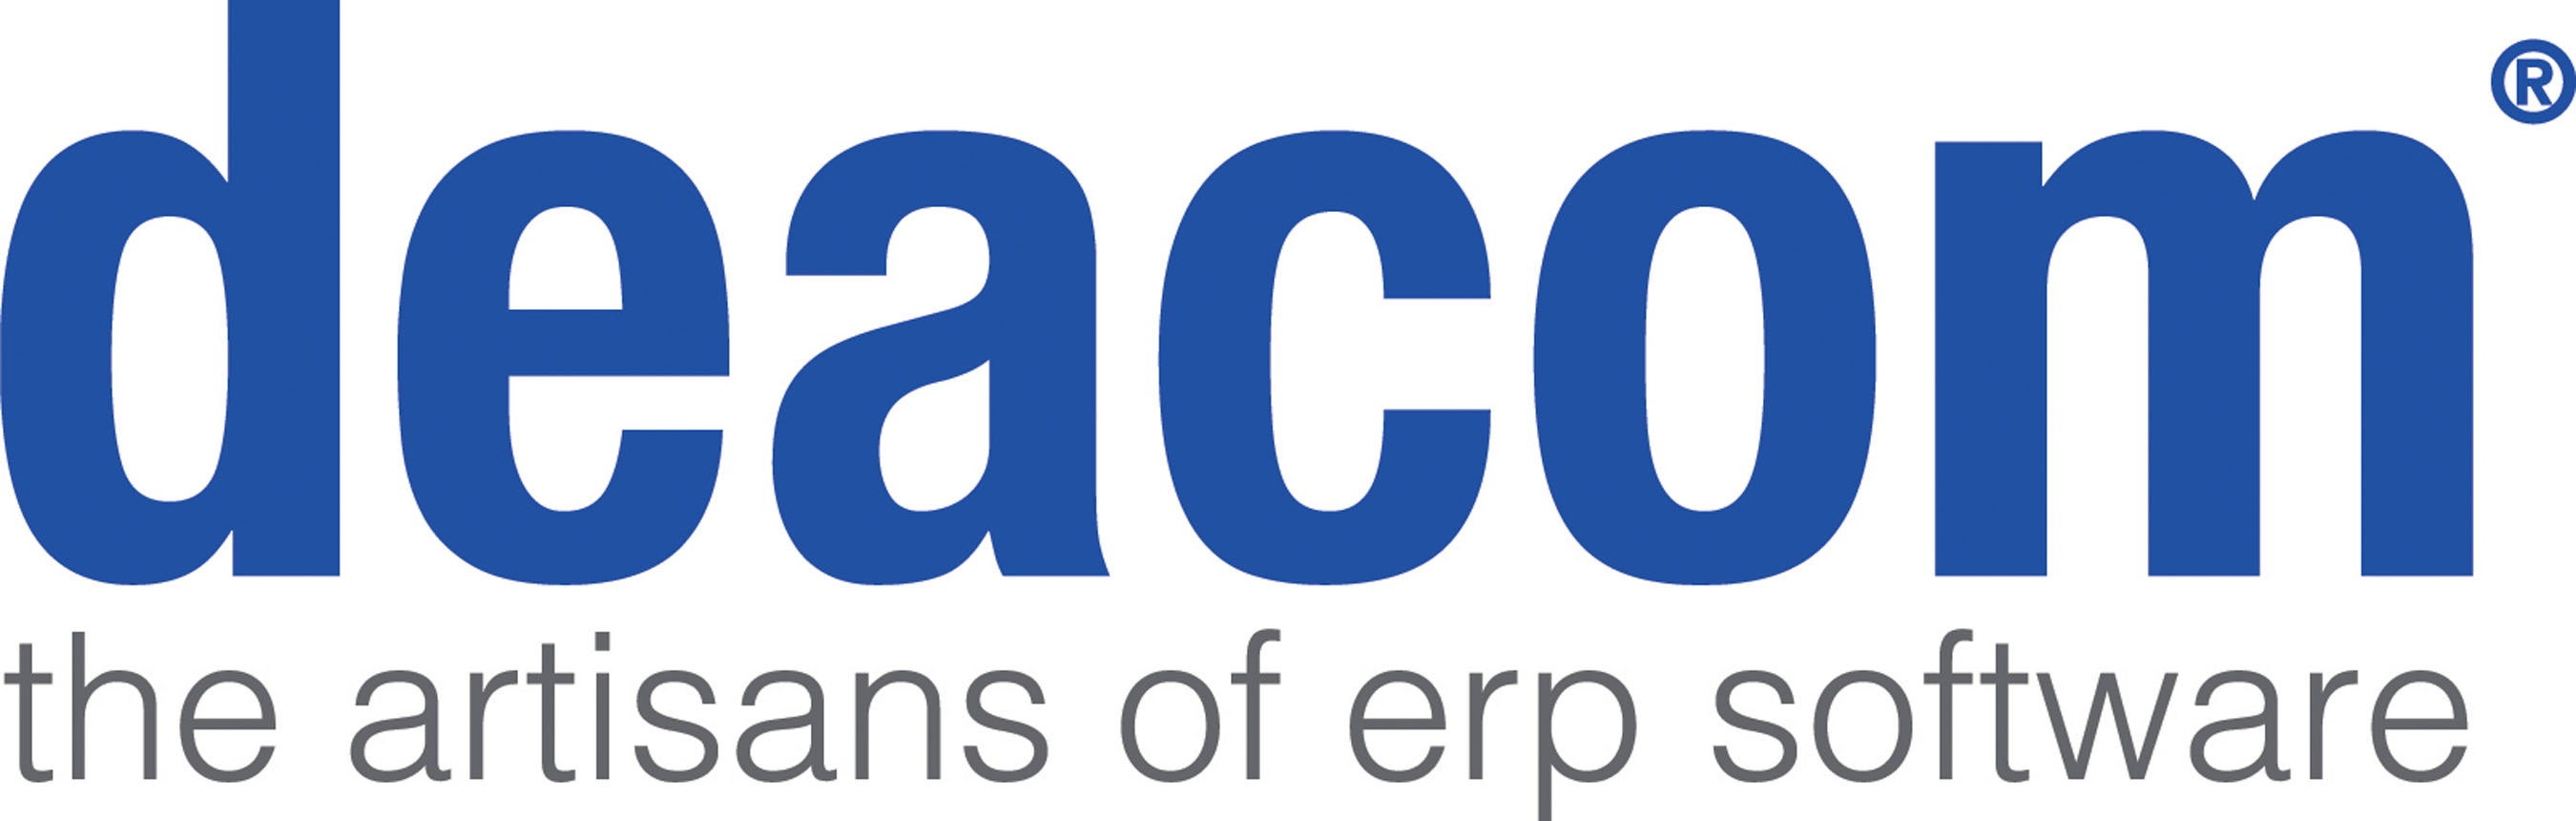 Deacom, Inc. is the producer of DEACOM, a complete Enterprise Resource Planning (ERP) system for process manufacturers with difficult-to-handle requirements. The DEACOM System seamlessly links all departments within a manufacturing company, providing a comprehensive view of the entire operation. By making complex issues simple, Deacom helps streamline manufacturing business processes to maximize productivity and profitability.